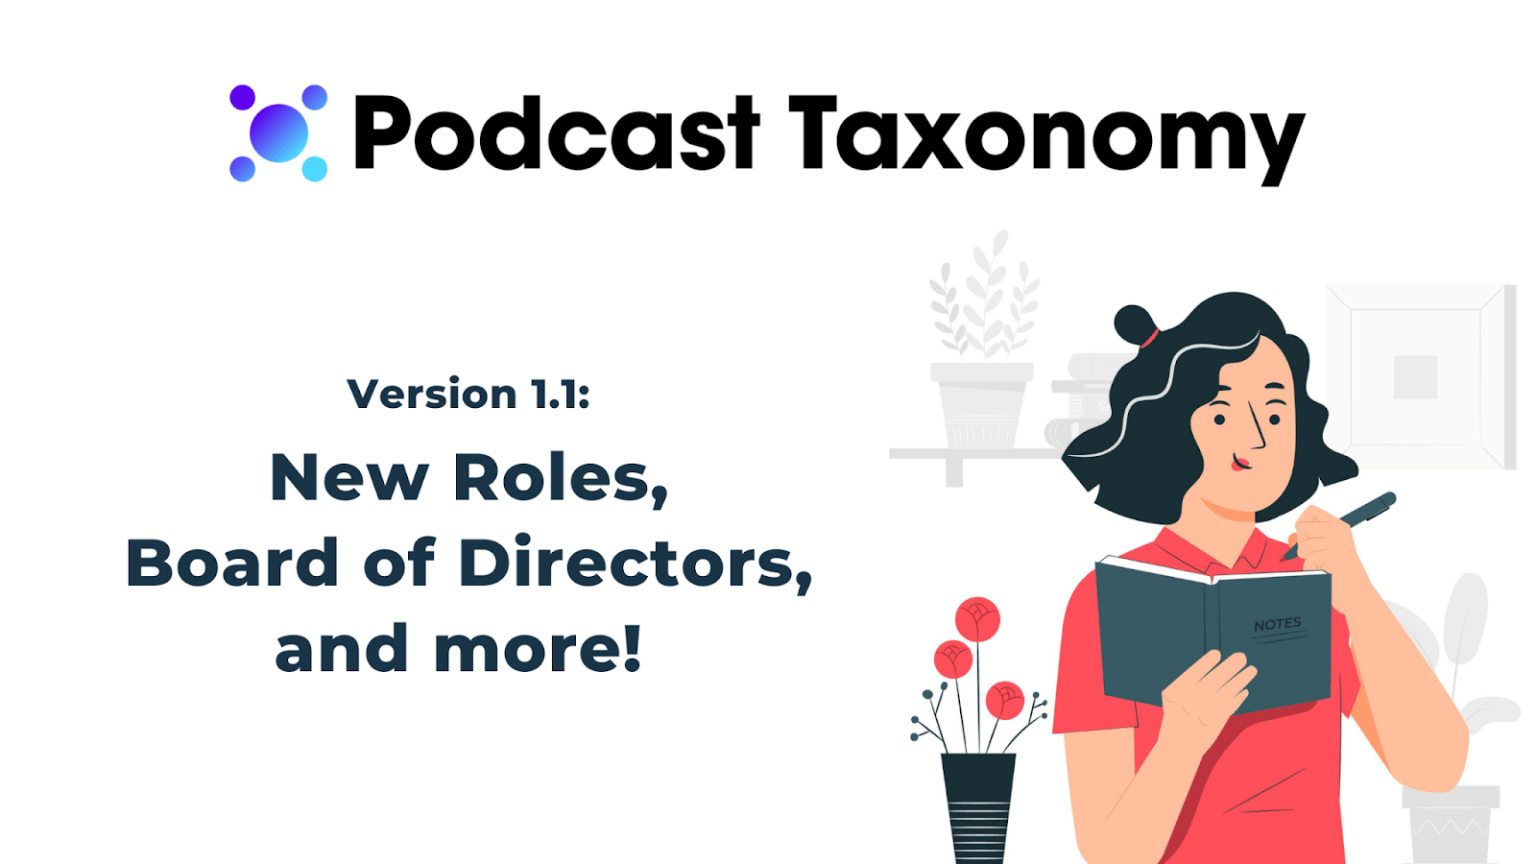 Announcing: Podcast Taxonomy Version 1.1